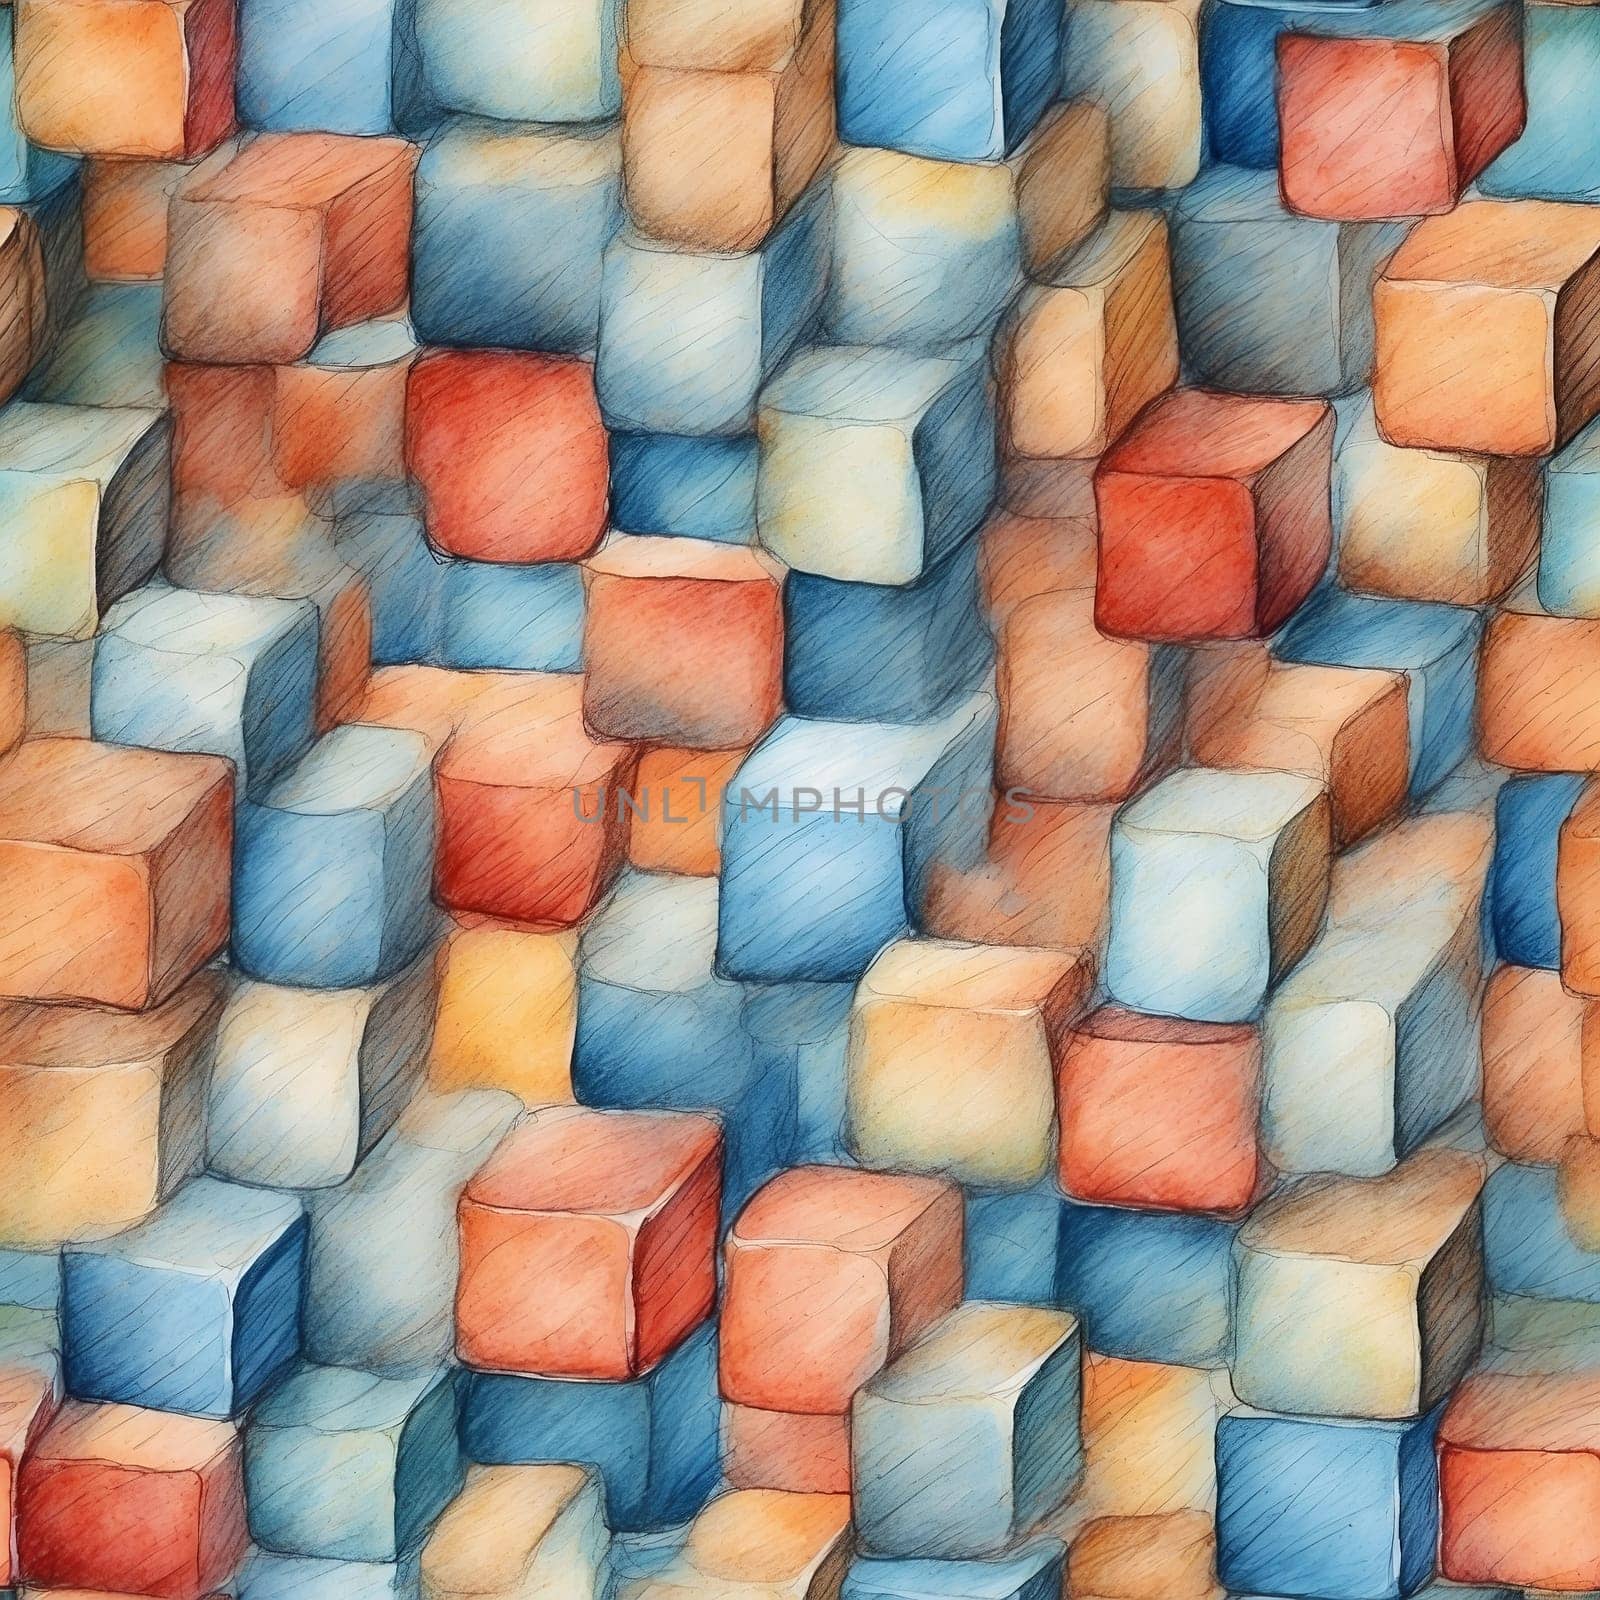 A seamless pattern featuring a painting of cubes in various vibrant colors.